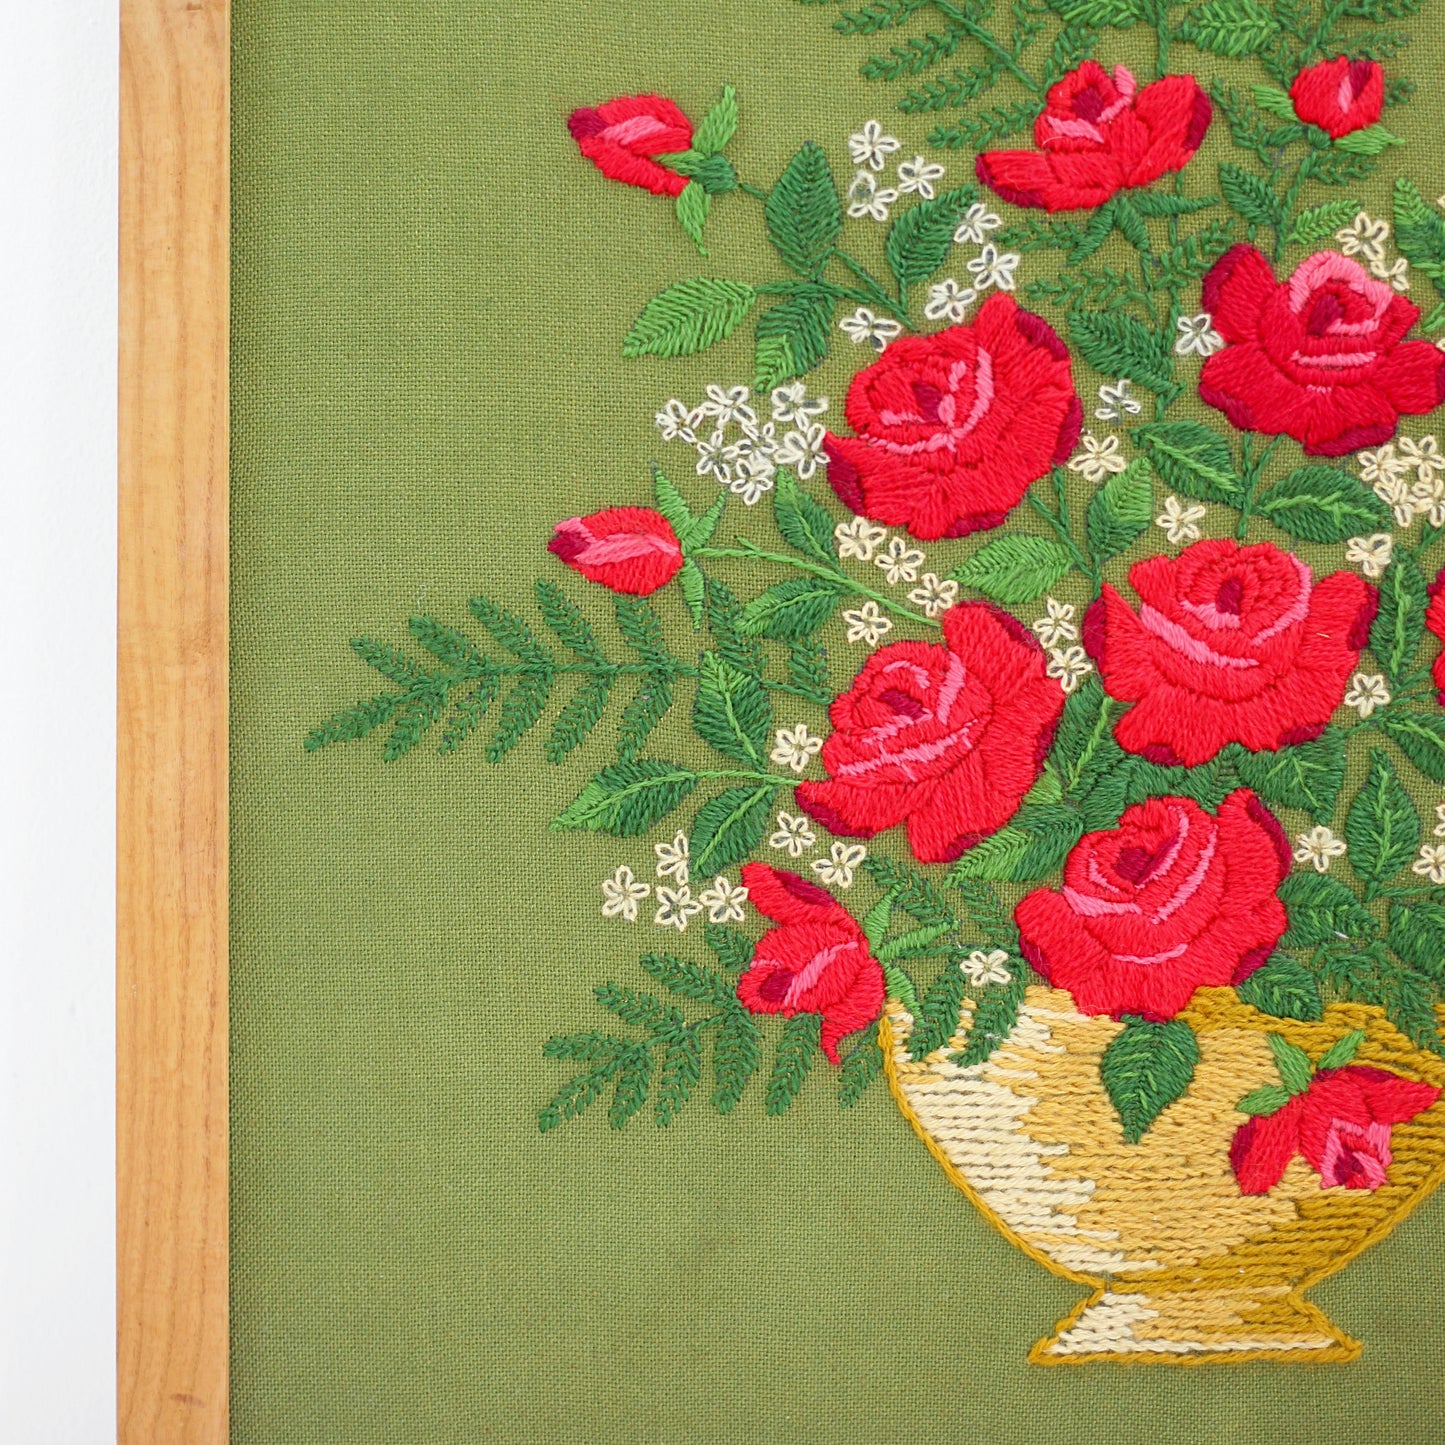 SOLD - Large Vintage Crewel Embroidery - Bouquet of Roses